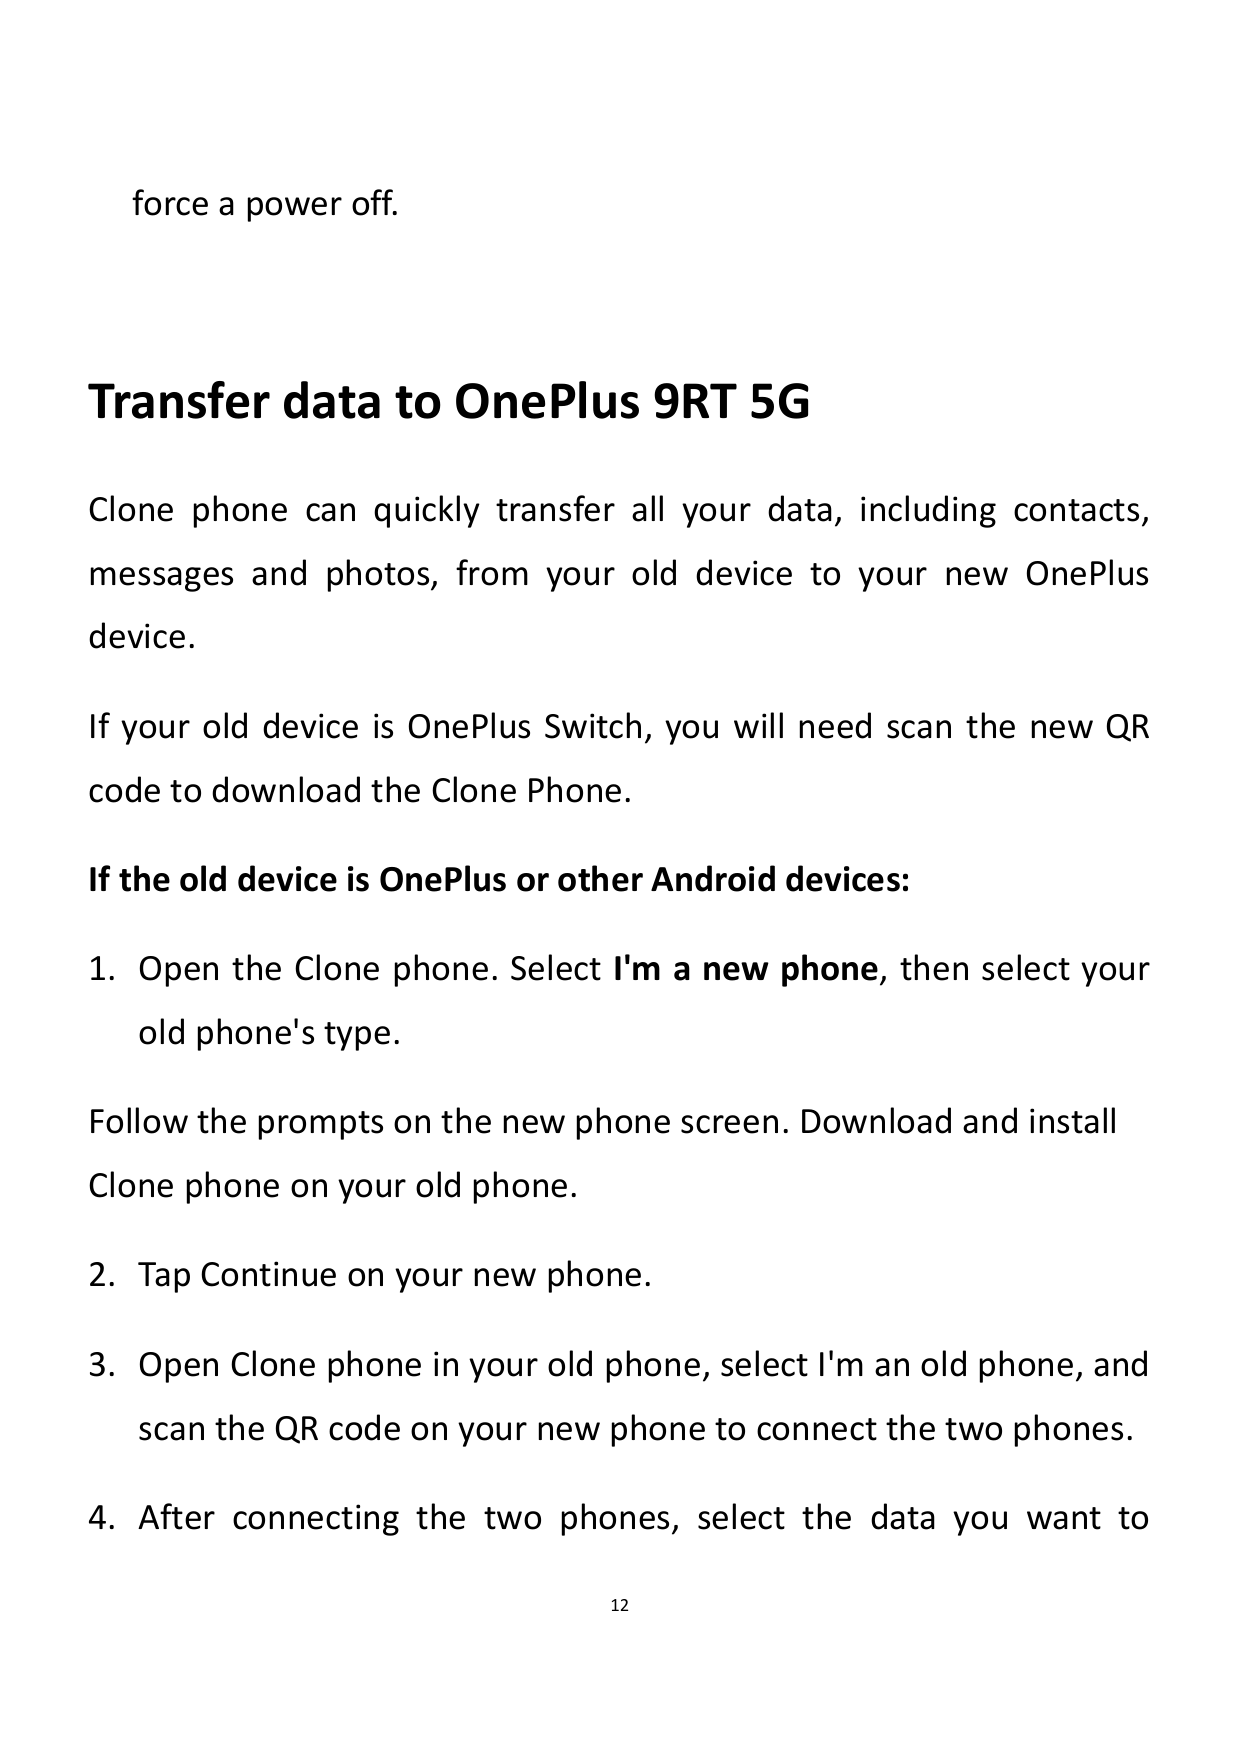 force a power off.Transfer data to OnePlus 9RT 5GClone phone can quickly transfer all your data, including contacts,messages and